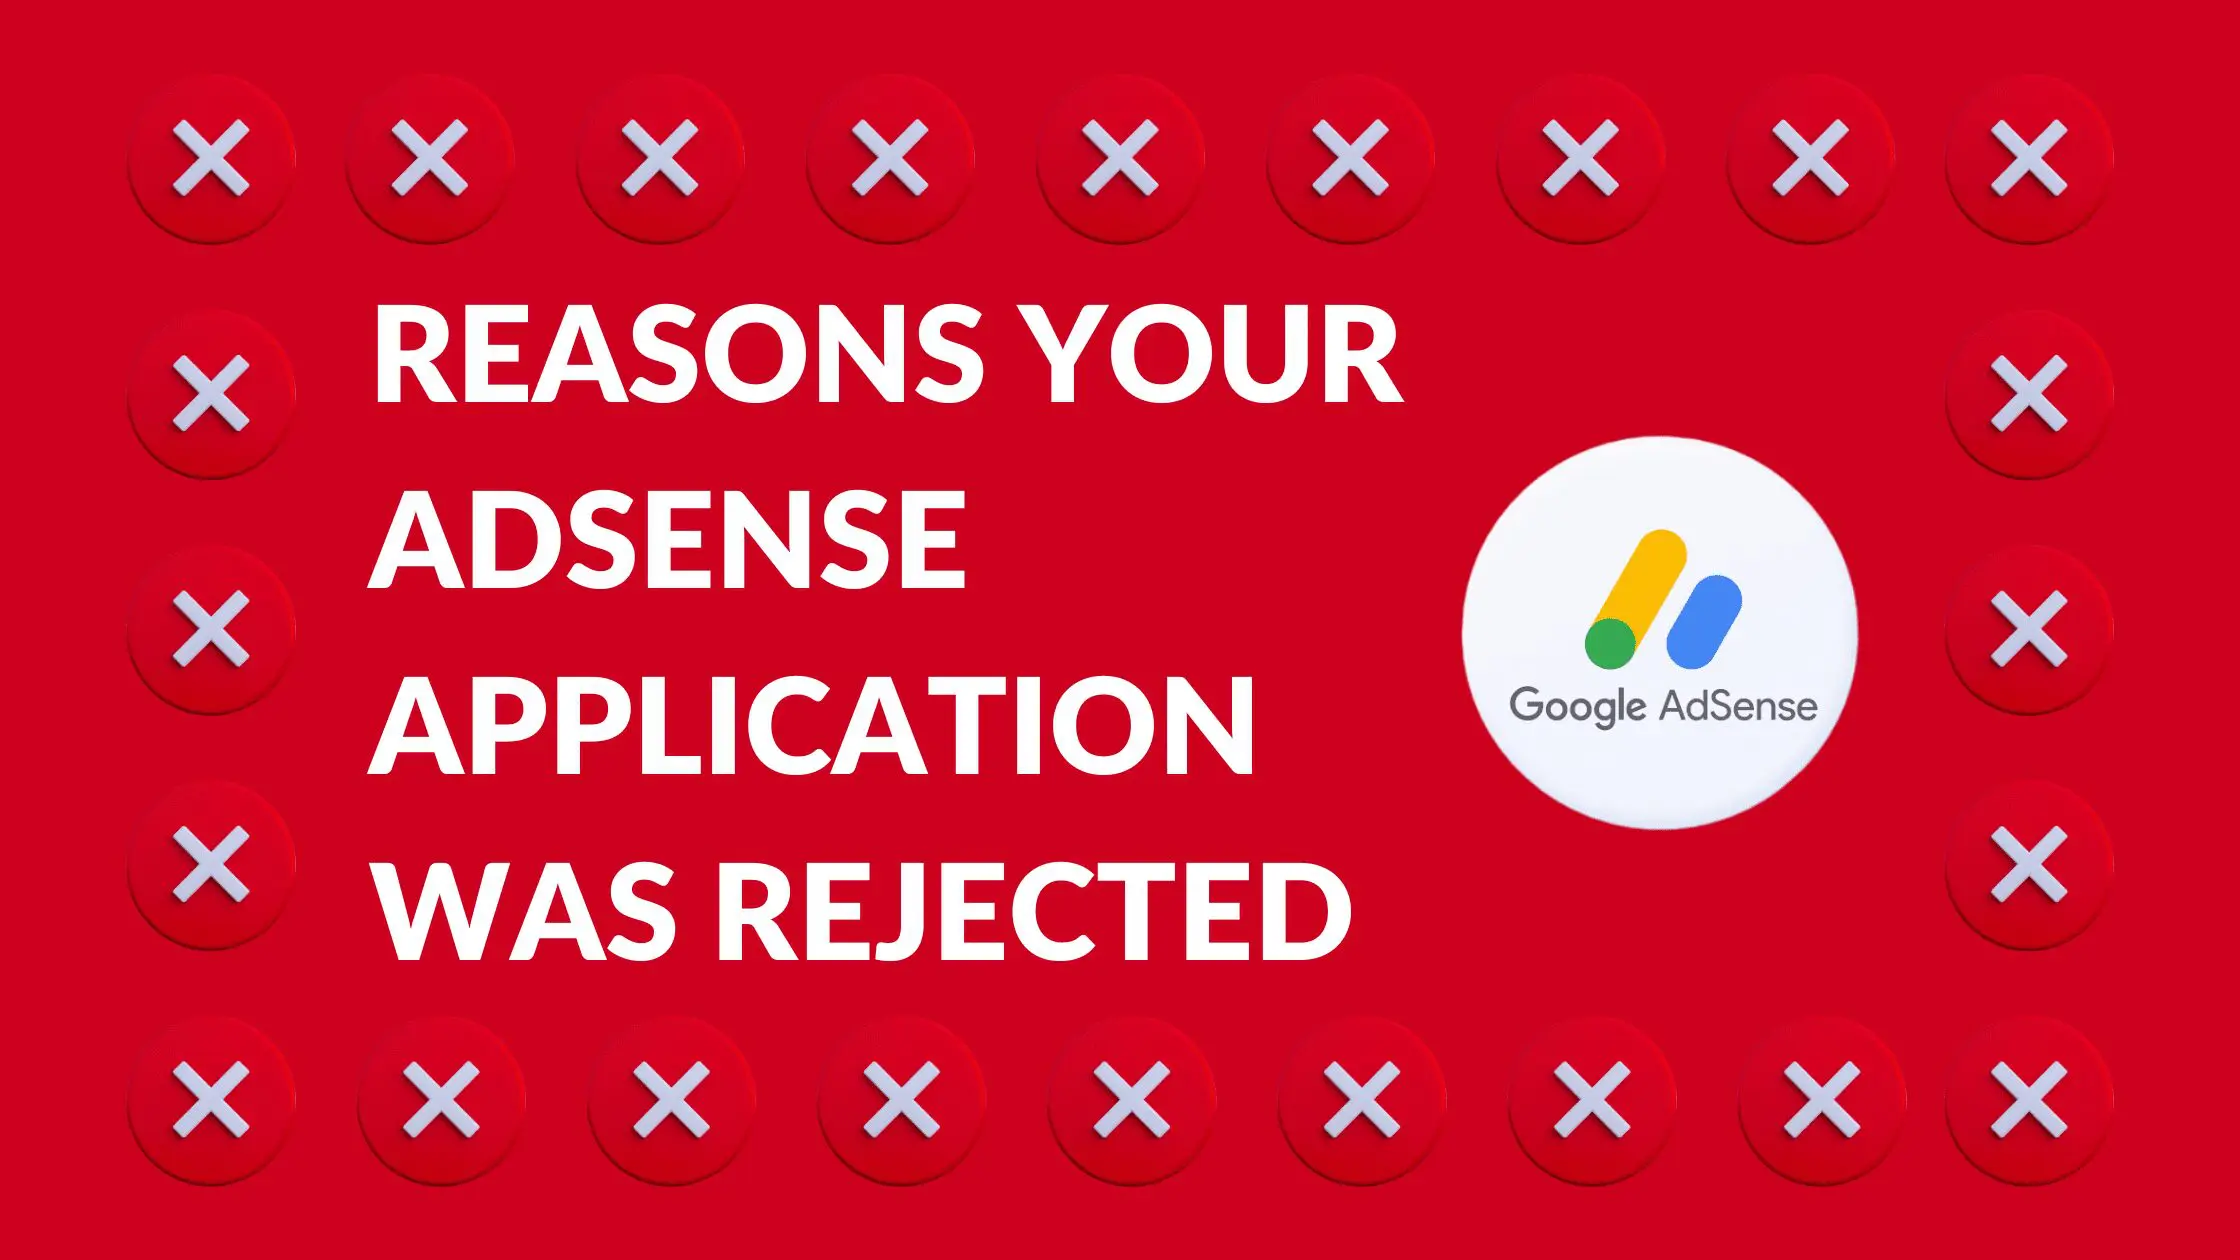 Reasons your adsense application was rejected written